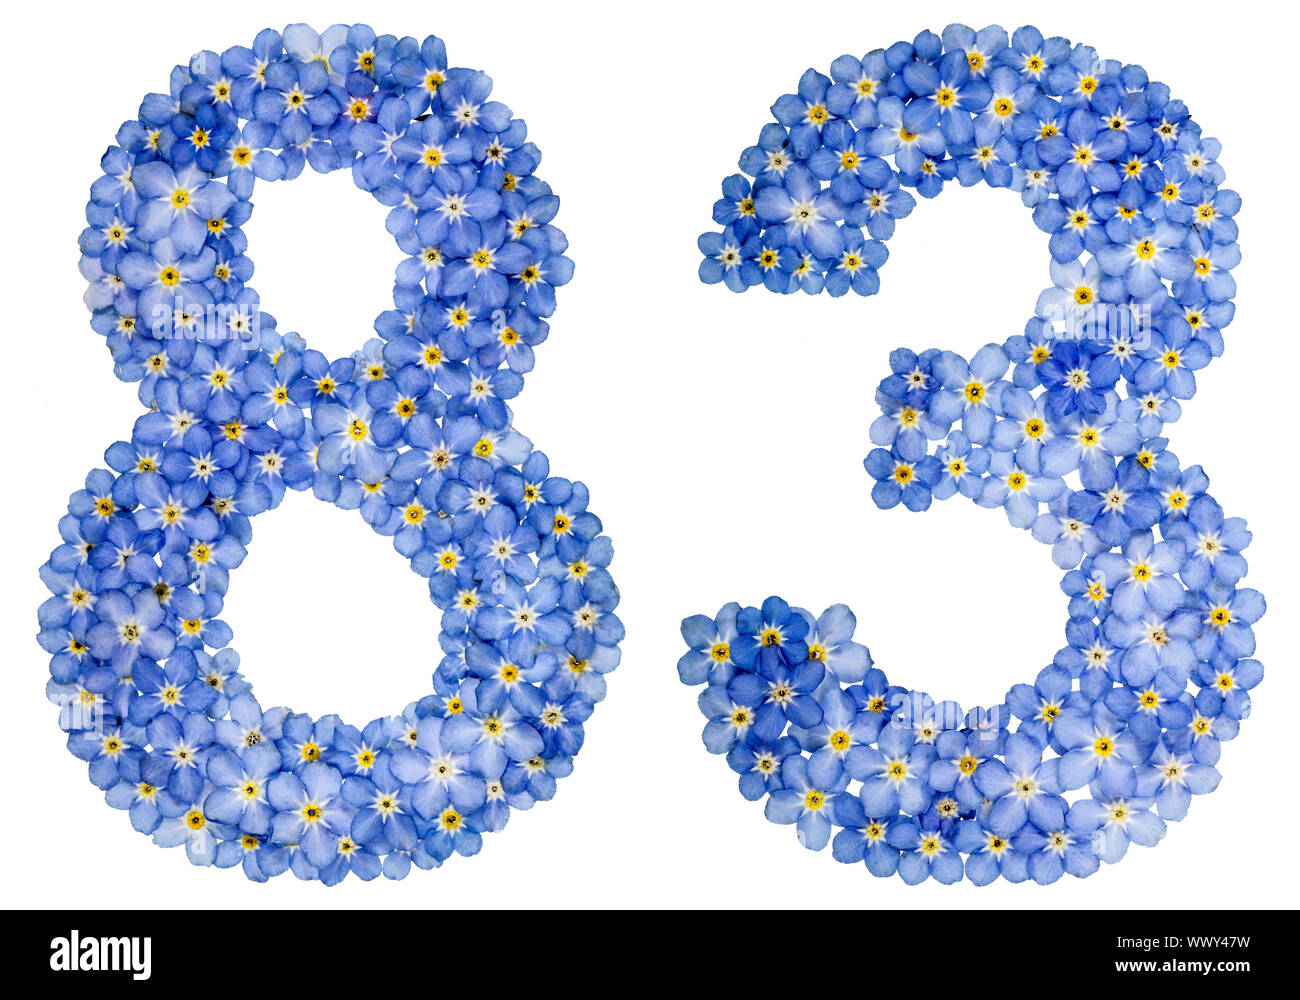 Arabic numeral 83, eighty three, from blue forget-me-not flowers Stock Photo